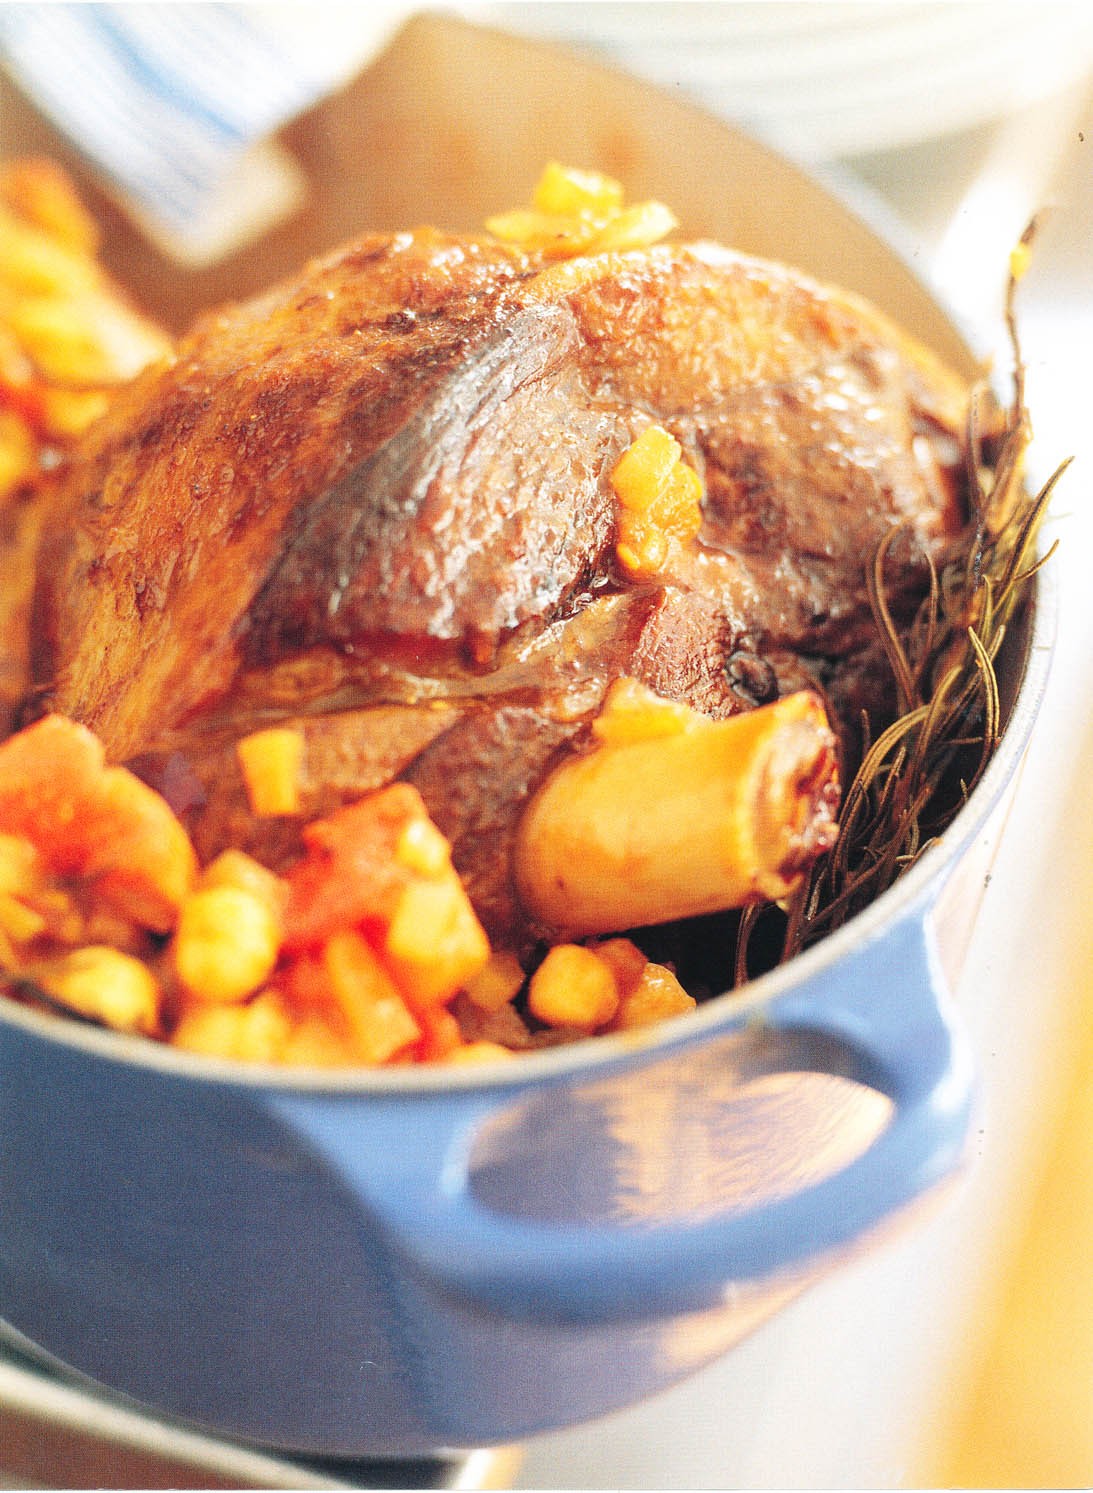 Braised leg of lamb with chickpeas and spices from Soho Cooking by ...